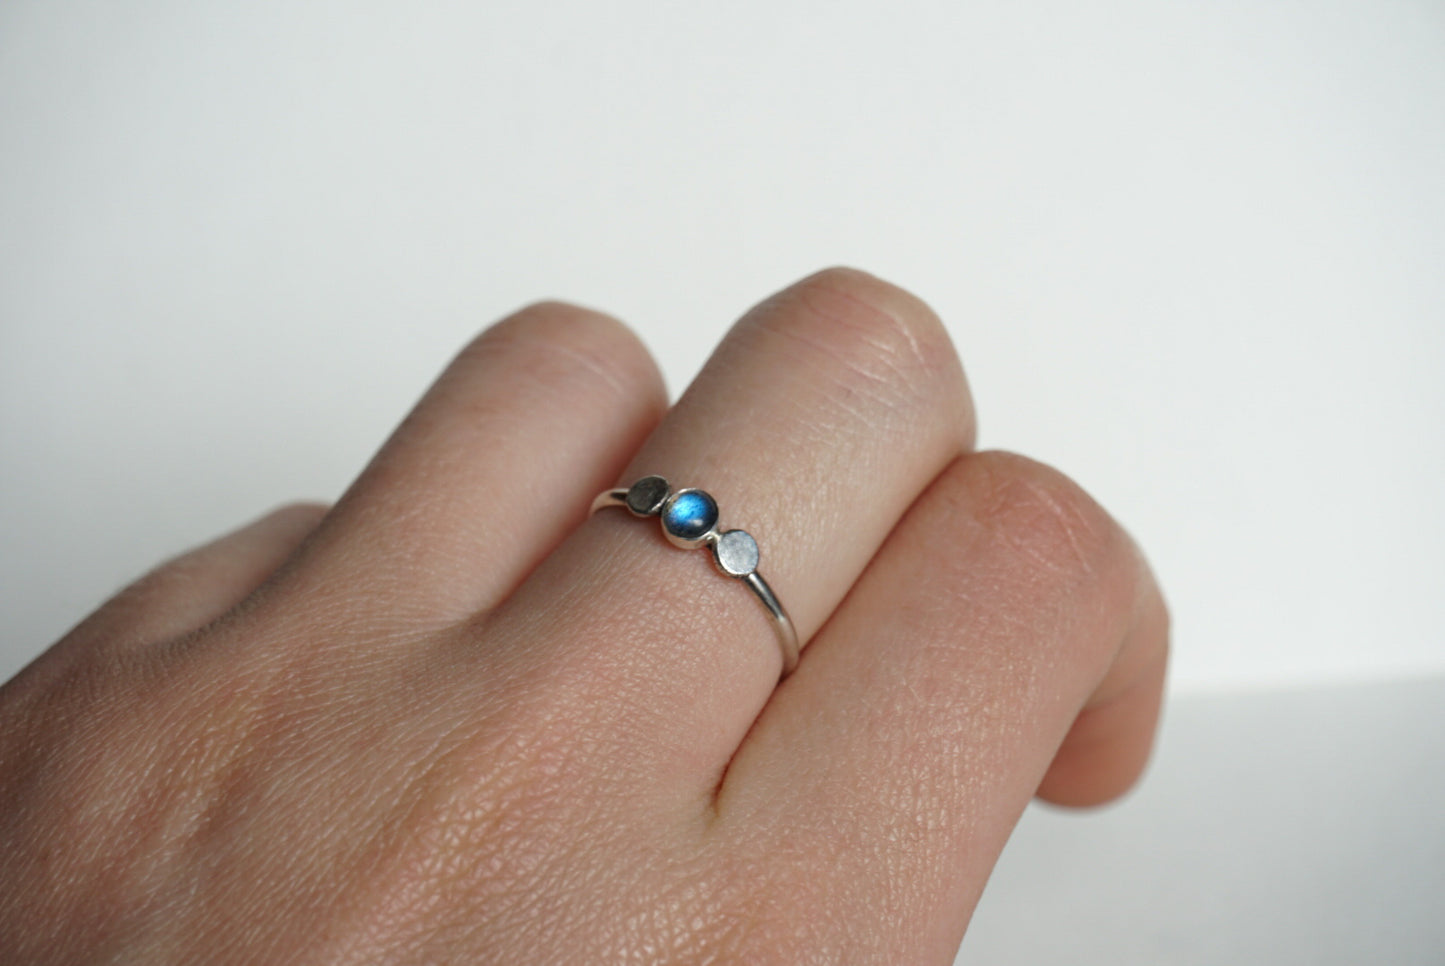 Sterling silver stacker ring with labradorite